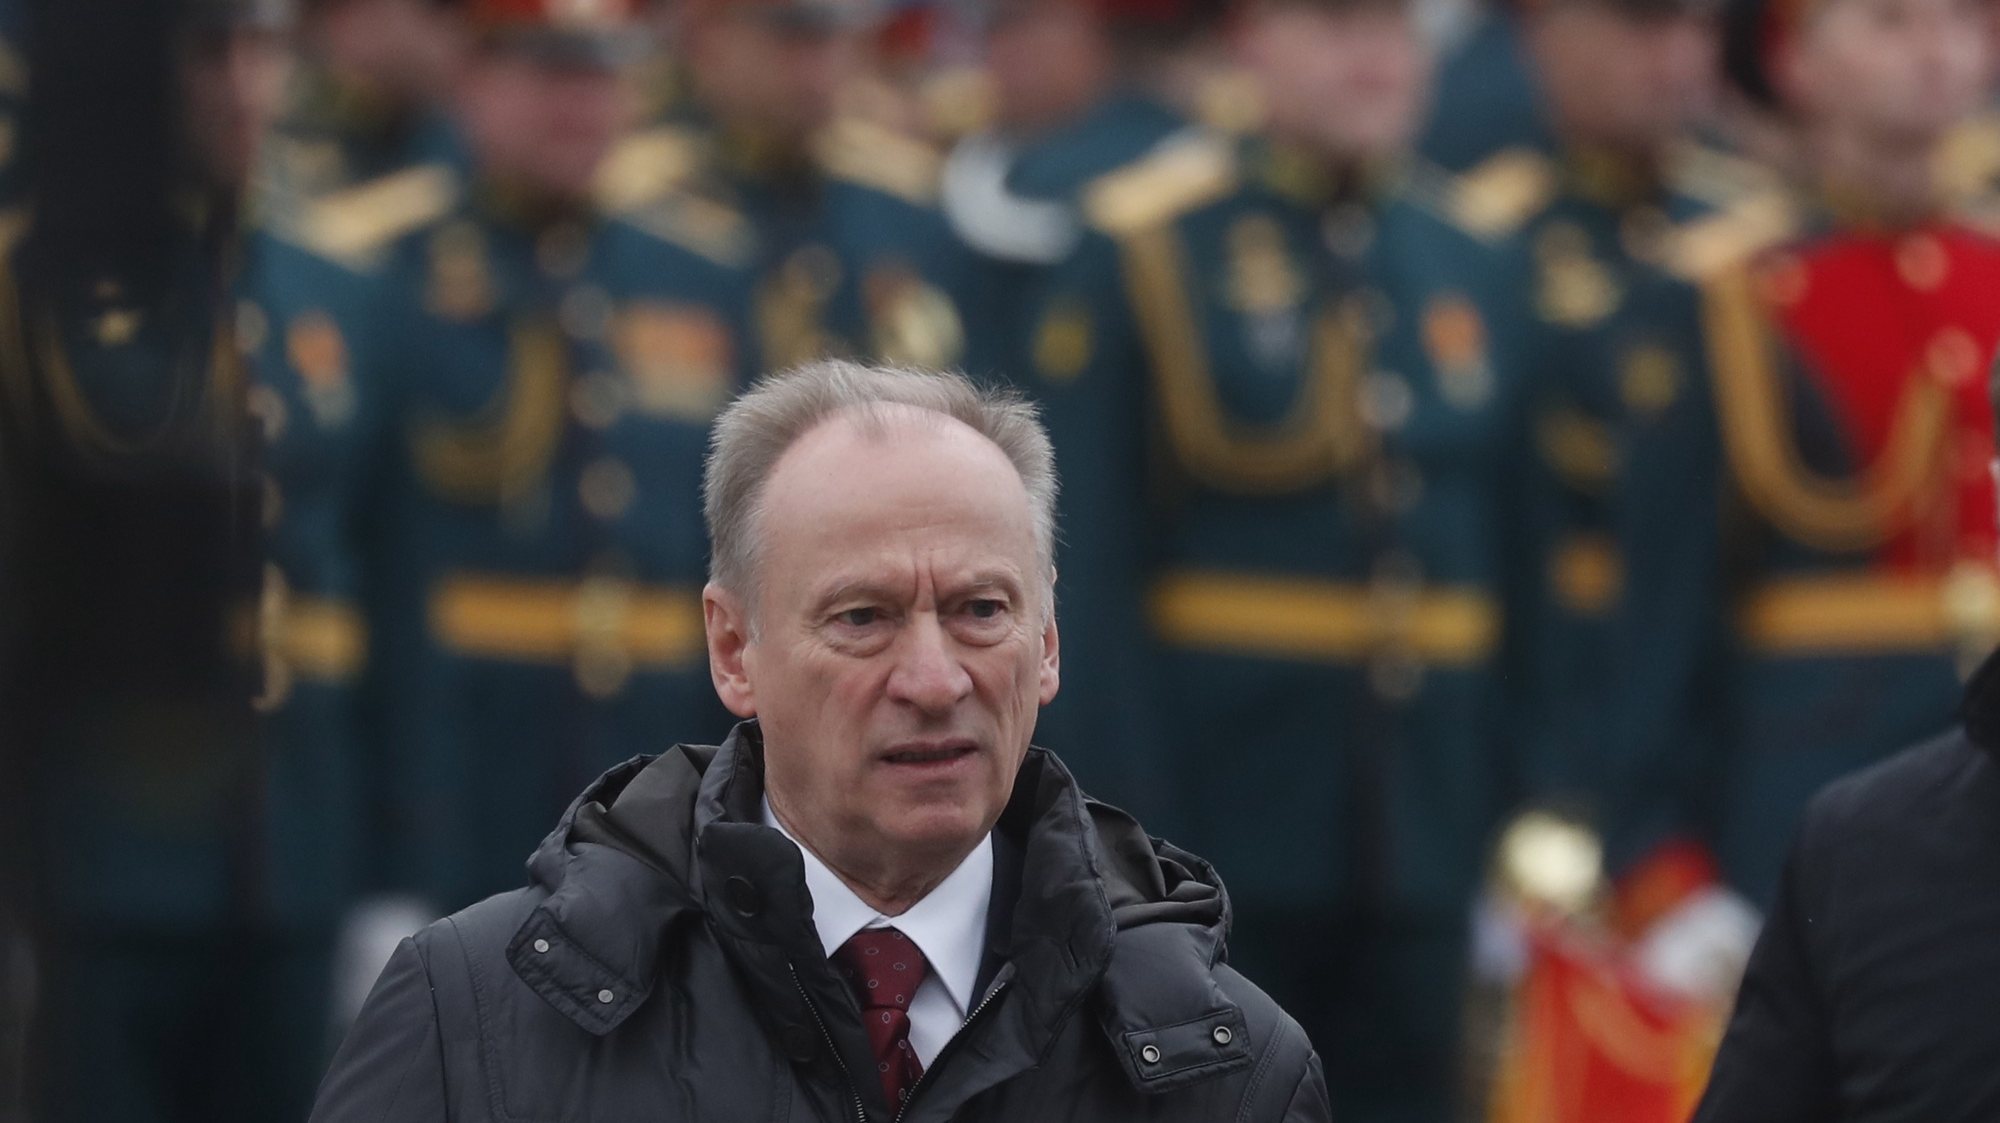 epa09187154 Russia&#039;s Security Council Secretary Nikolai Patrushev arrives to watch the Victory Day military parade in the Red Square in Moscow, Russia, 09 May 2021. The Victory Day military parade annually takes place 09 May 2021 in the Red Square to mark the victory of the Soviet Union over the Nazi Germany in the World War II.  EPA/MAXIM SHIPENKOV